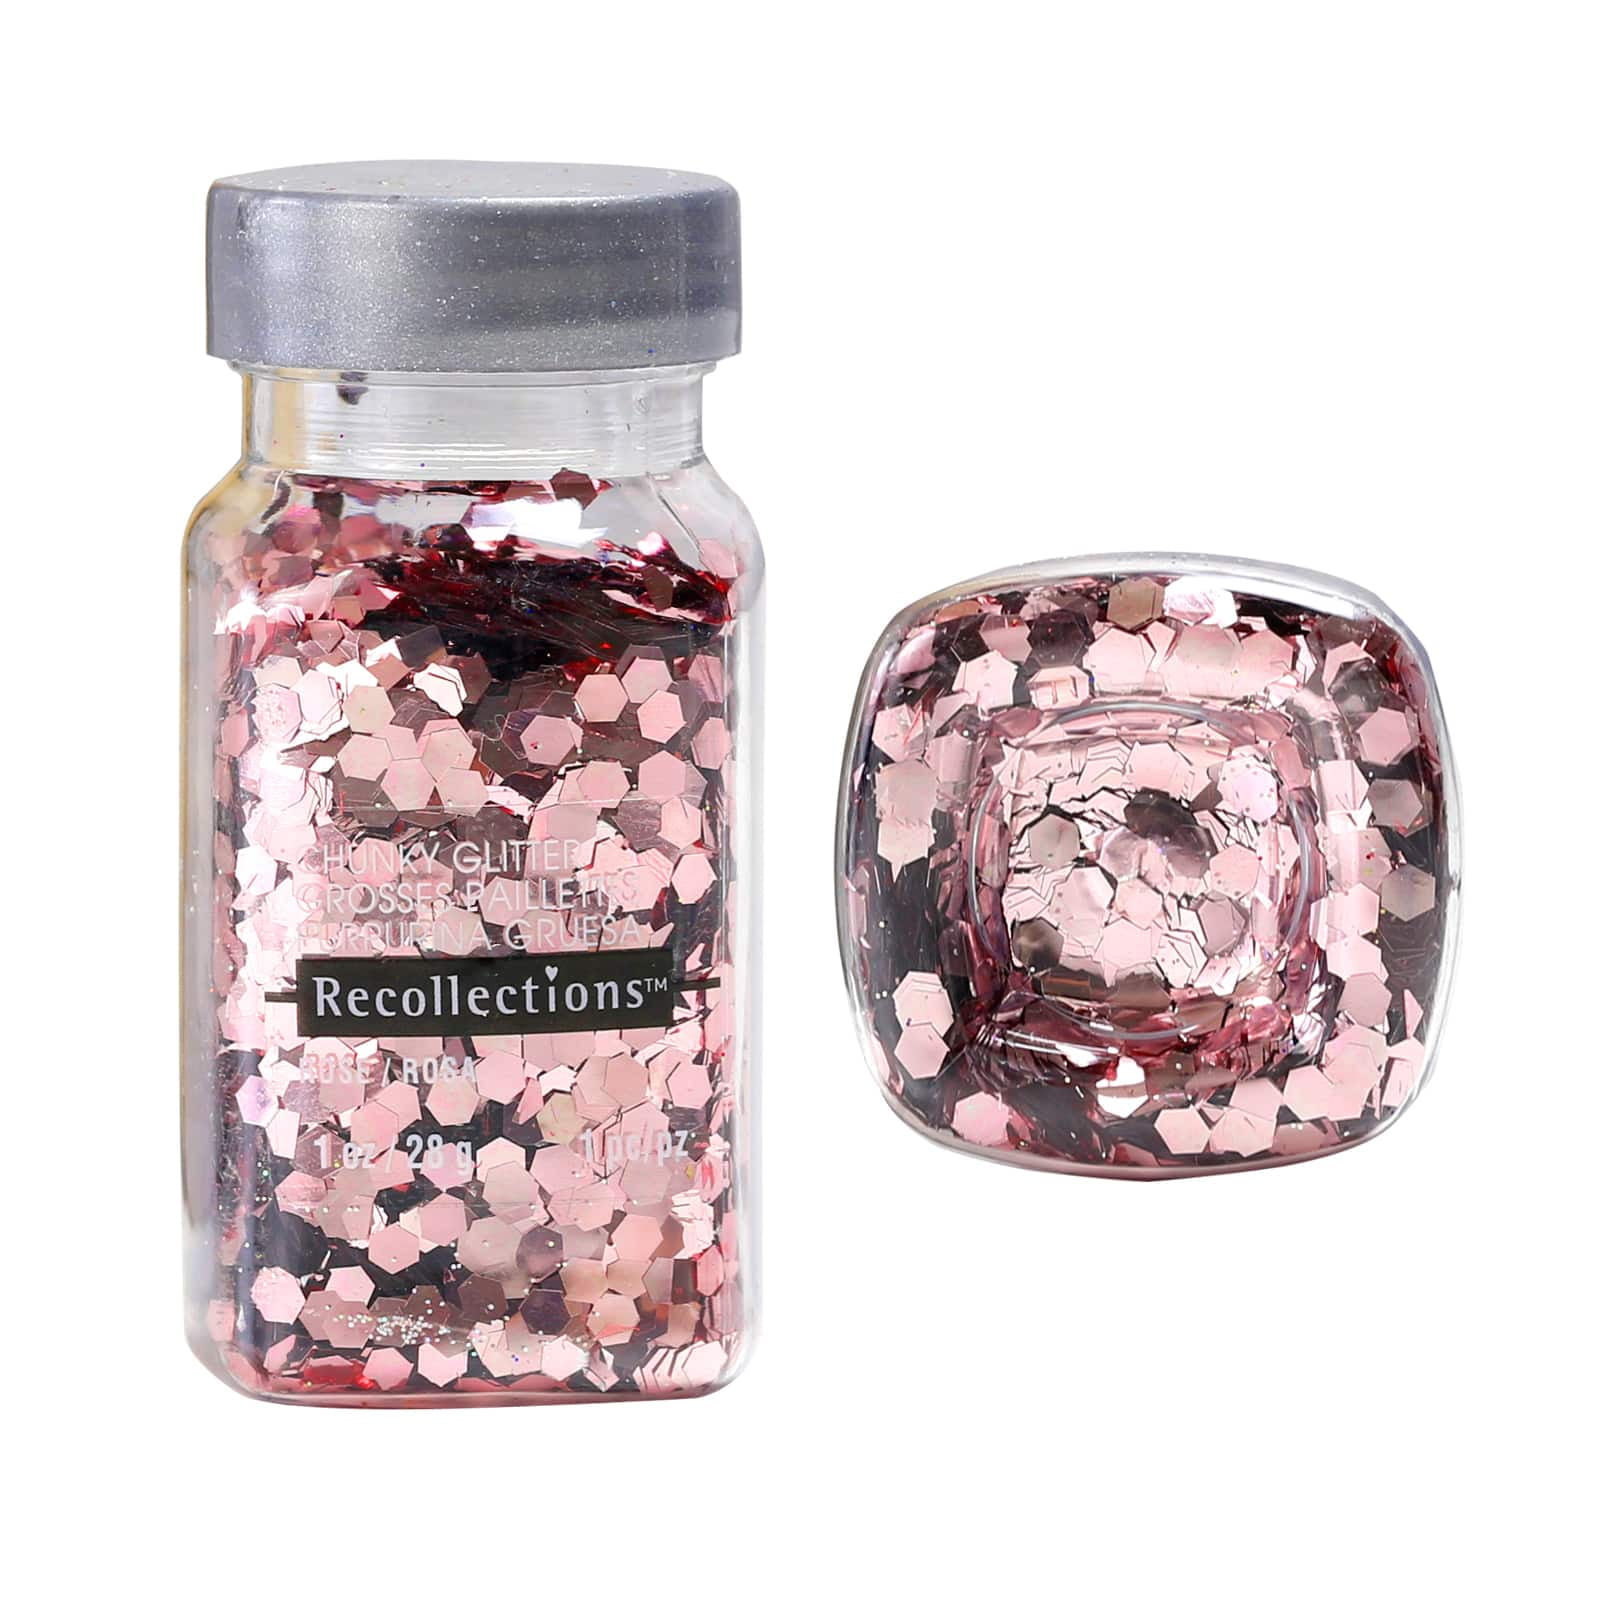 12 Pack: Confetti Glitter by Recollections, 1oz., Red